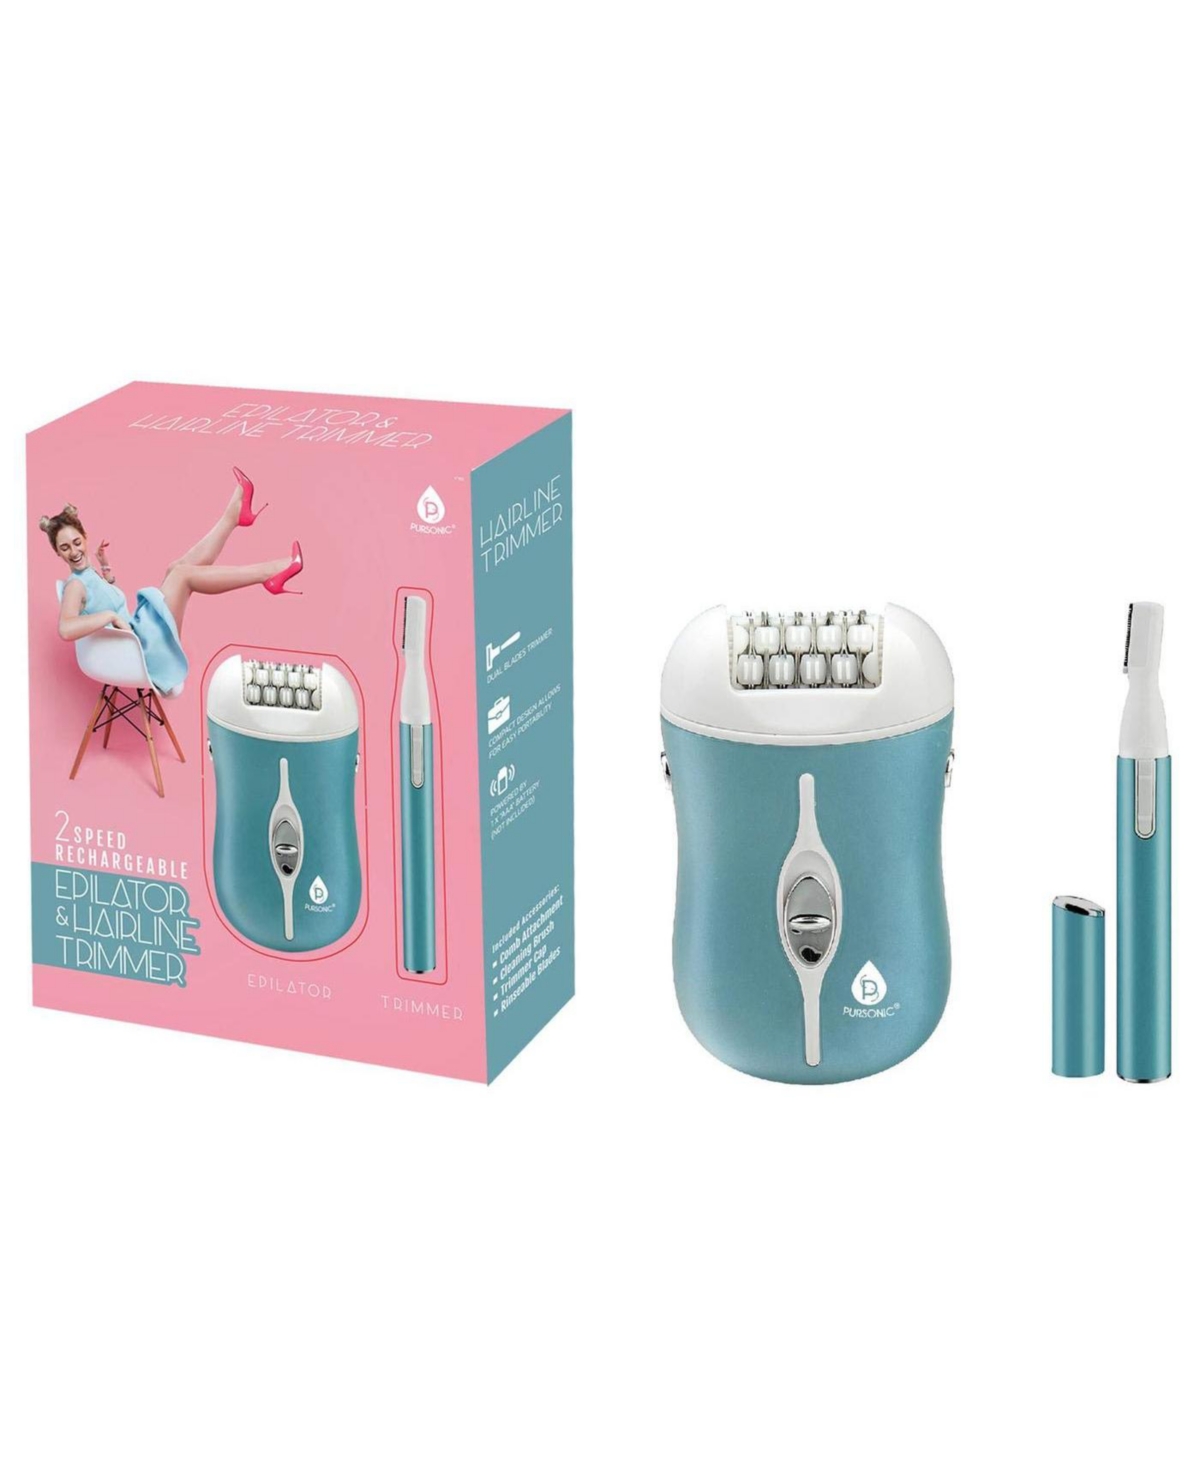 2 Speed Rechargeable Epilator & Hairline Trimmer - Blue